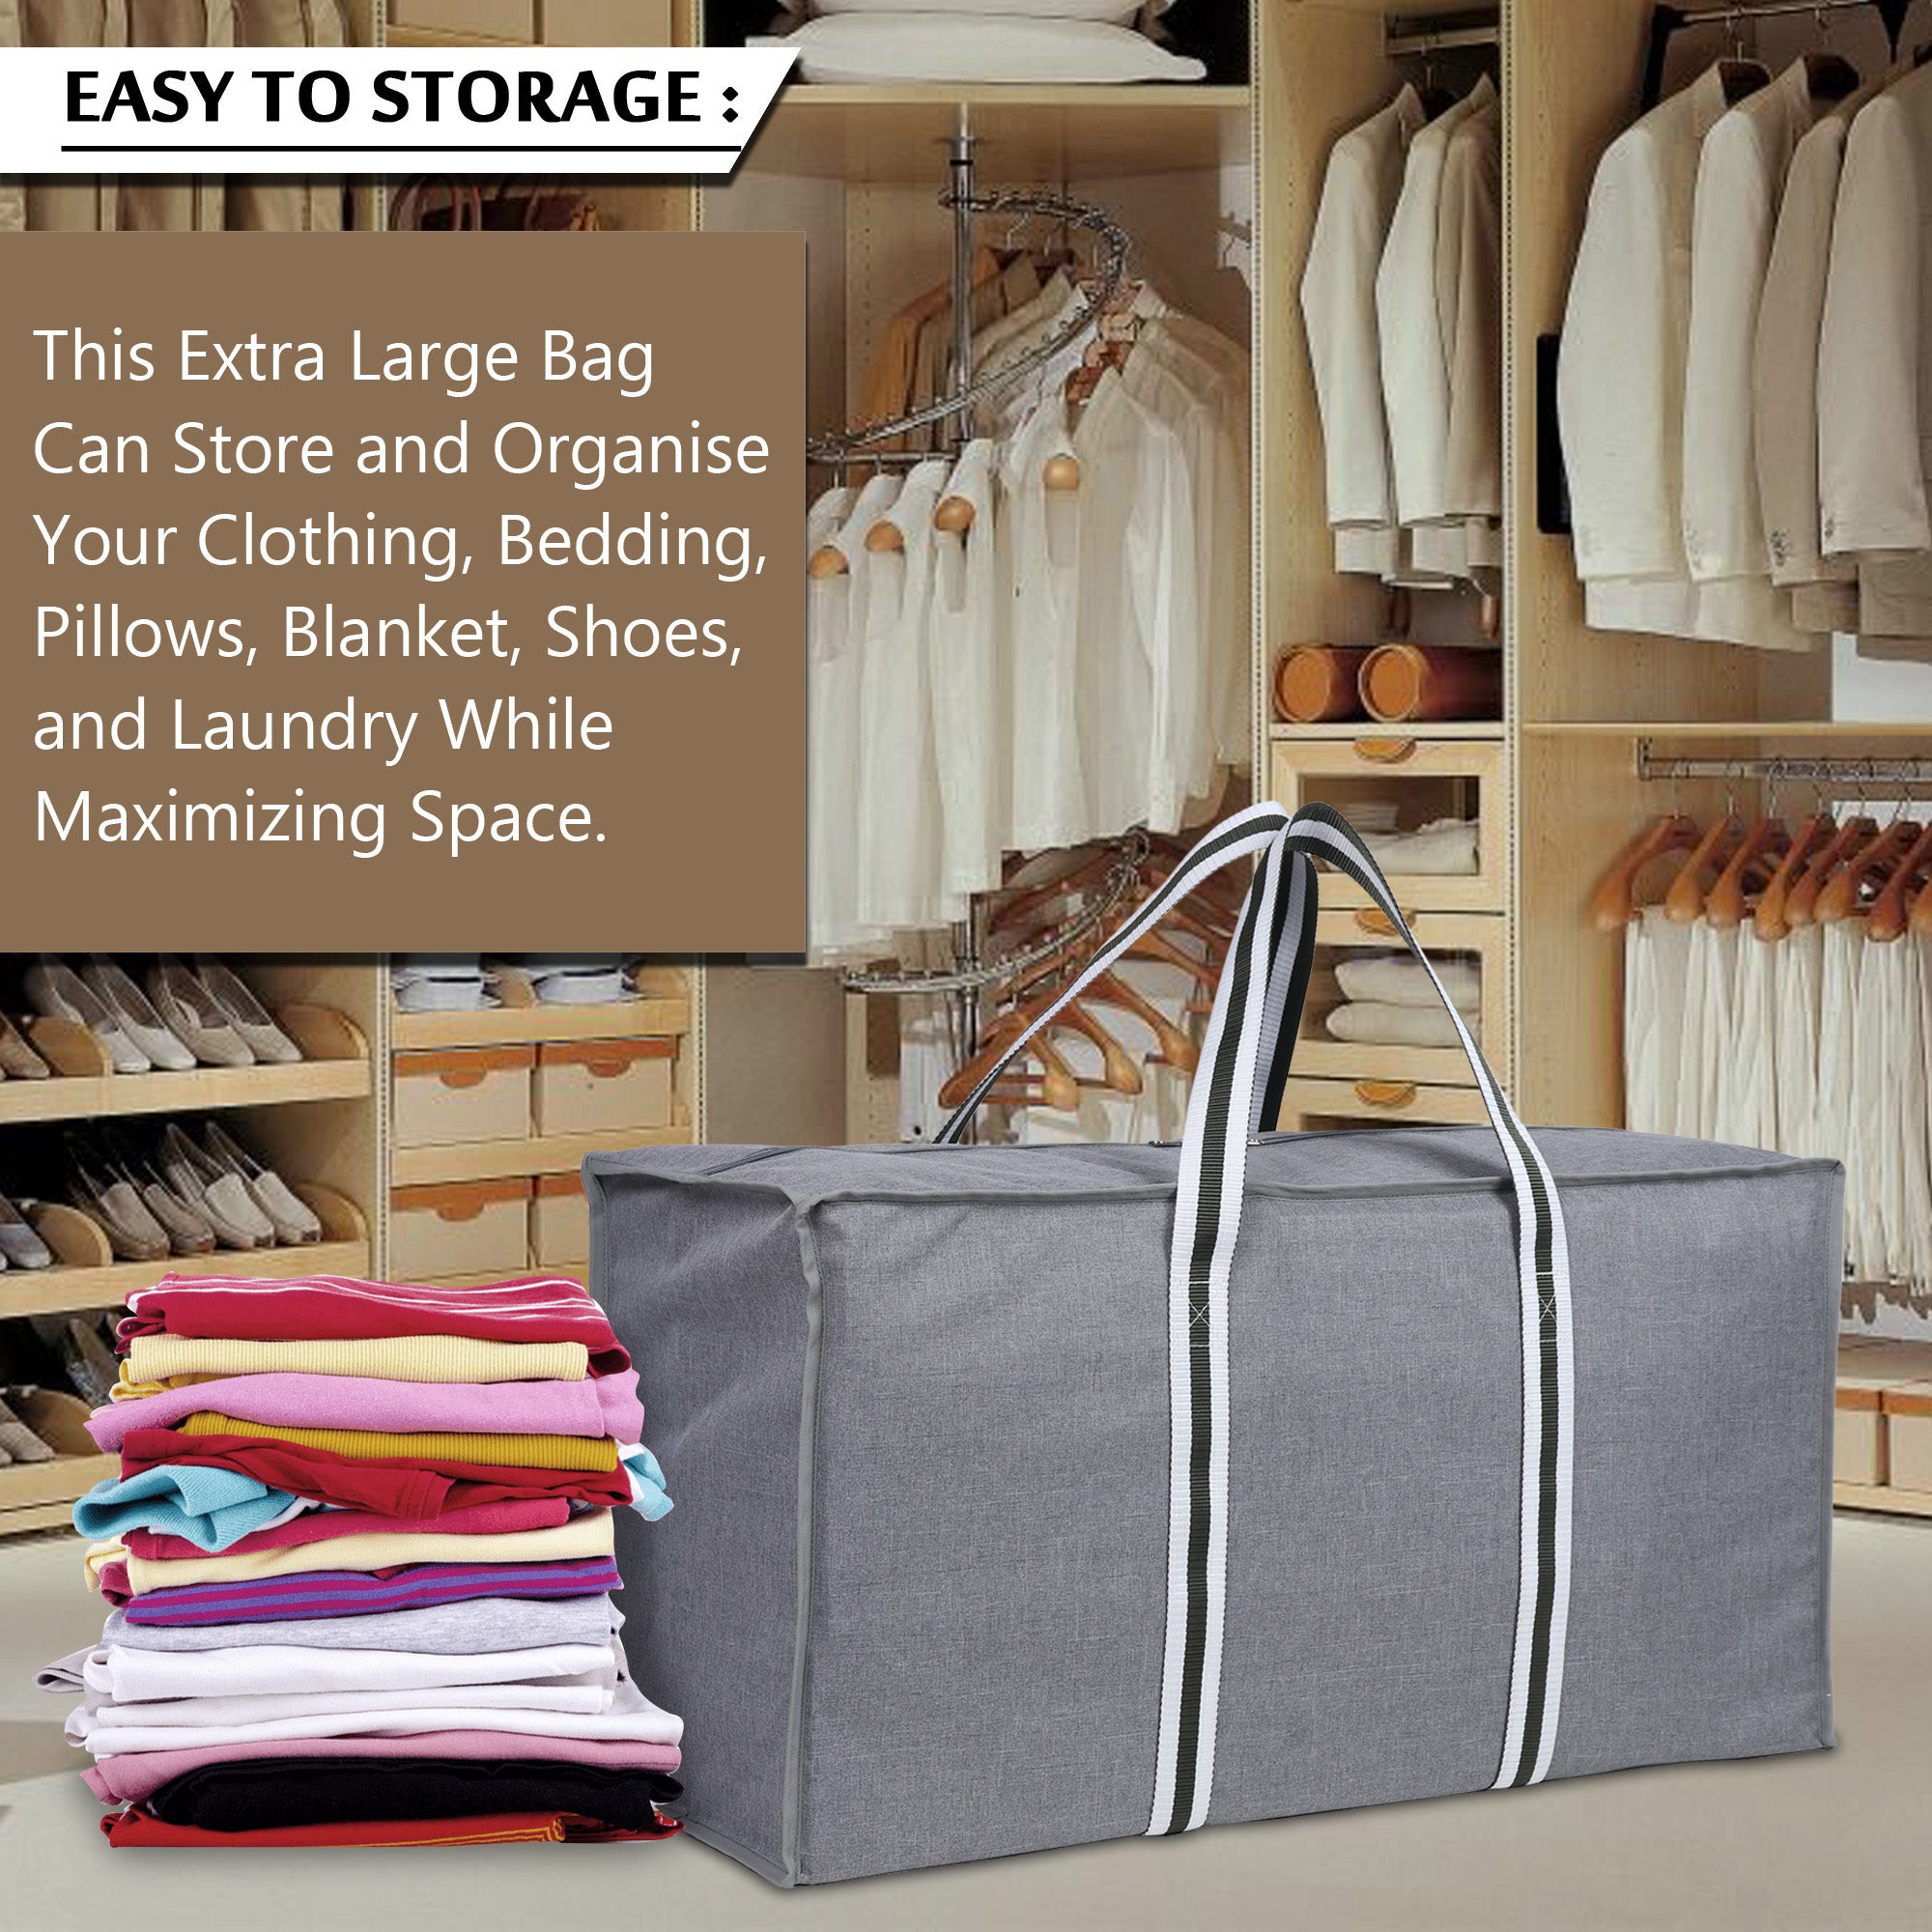 Double R Bags Large Storage Bag For Blanket Clothes Organizer, Comforter,  Bedroom Closet, Dorm Room Essentials, Strong Materials Extra Large